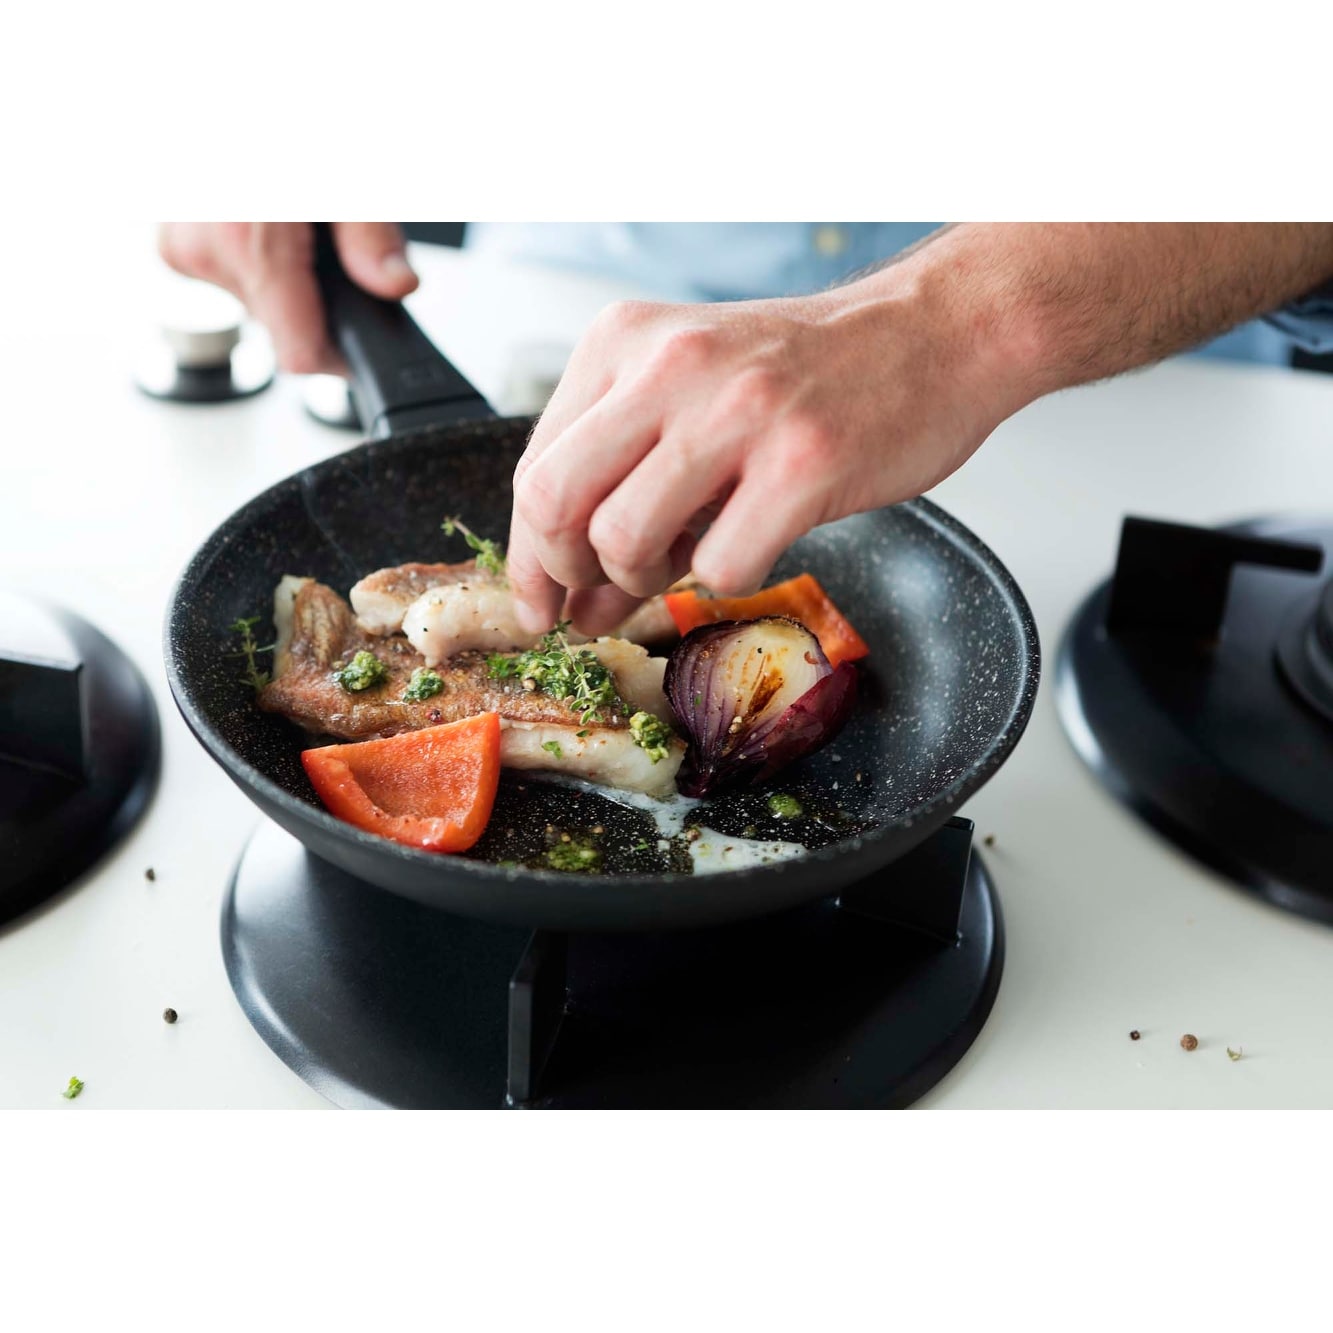 https://ak1.ostkcdn.com/images/products/is/images/direct/32e39a53fe8cfefc4df76e7f50940f68fd9bed75/ZWILLING-Madura-Plus-Forged-Aluminum-Nonstick-Fry-Pan.jpg